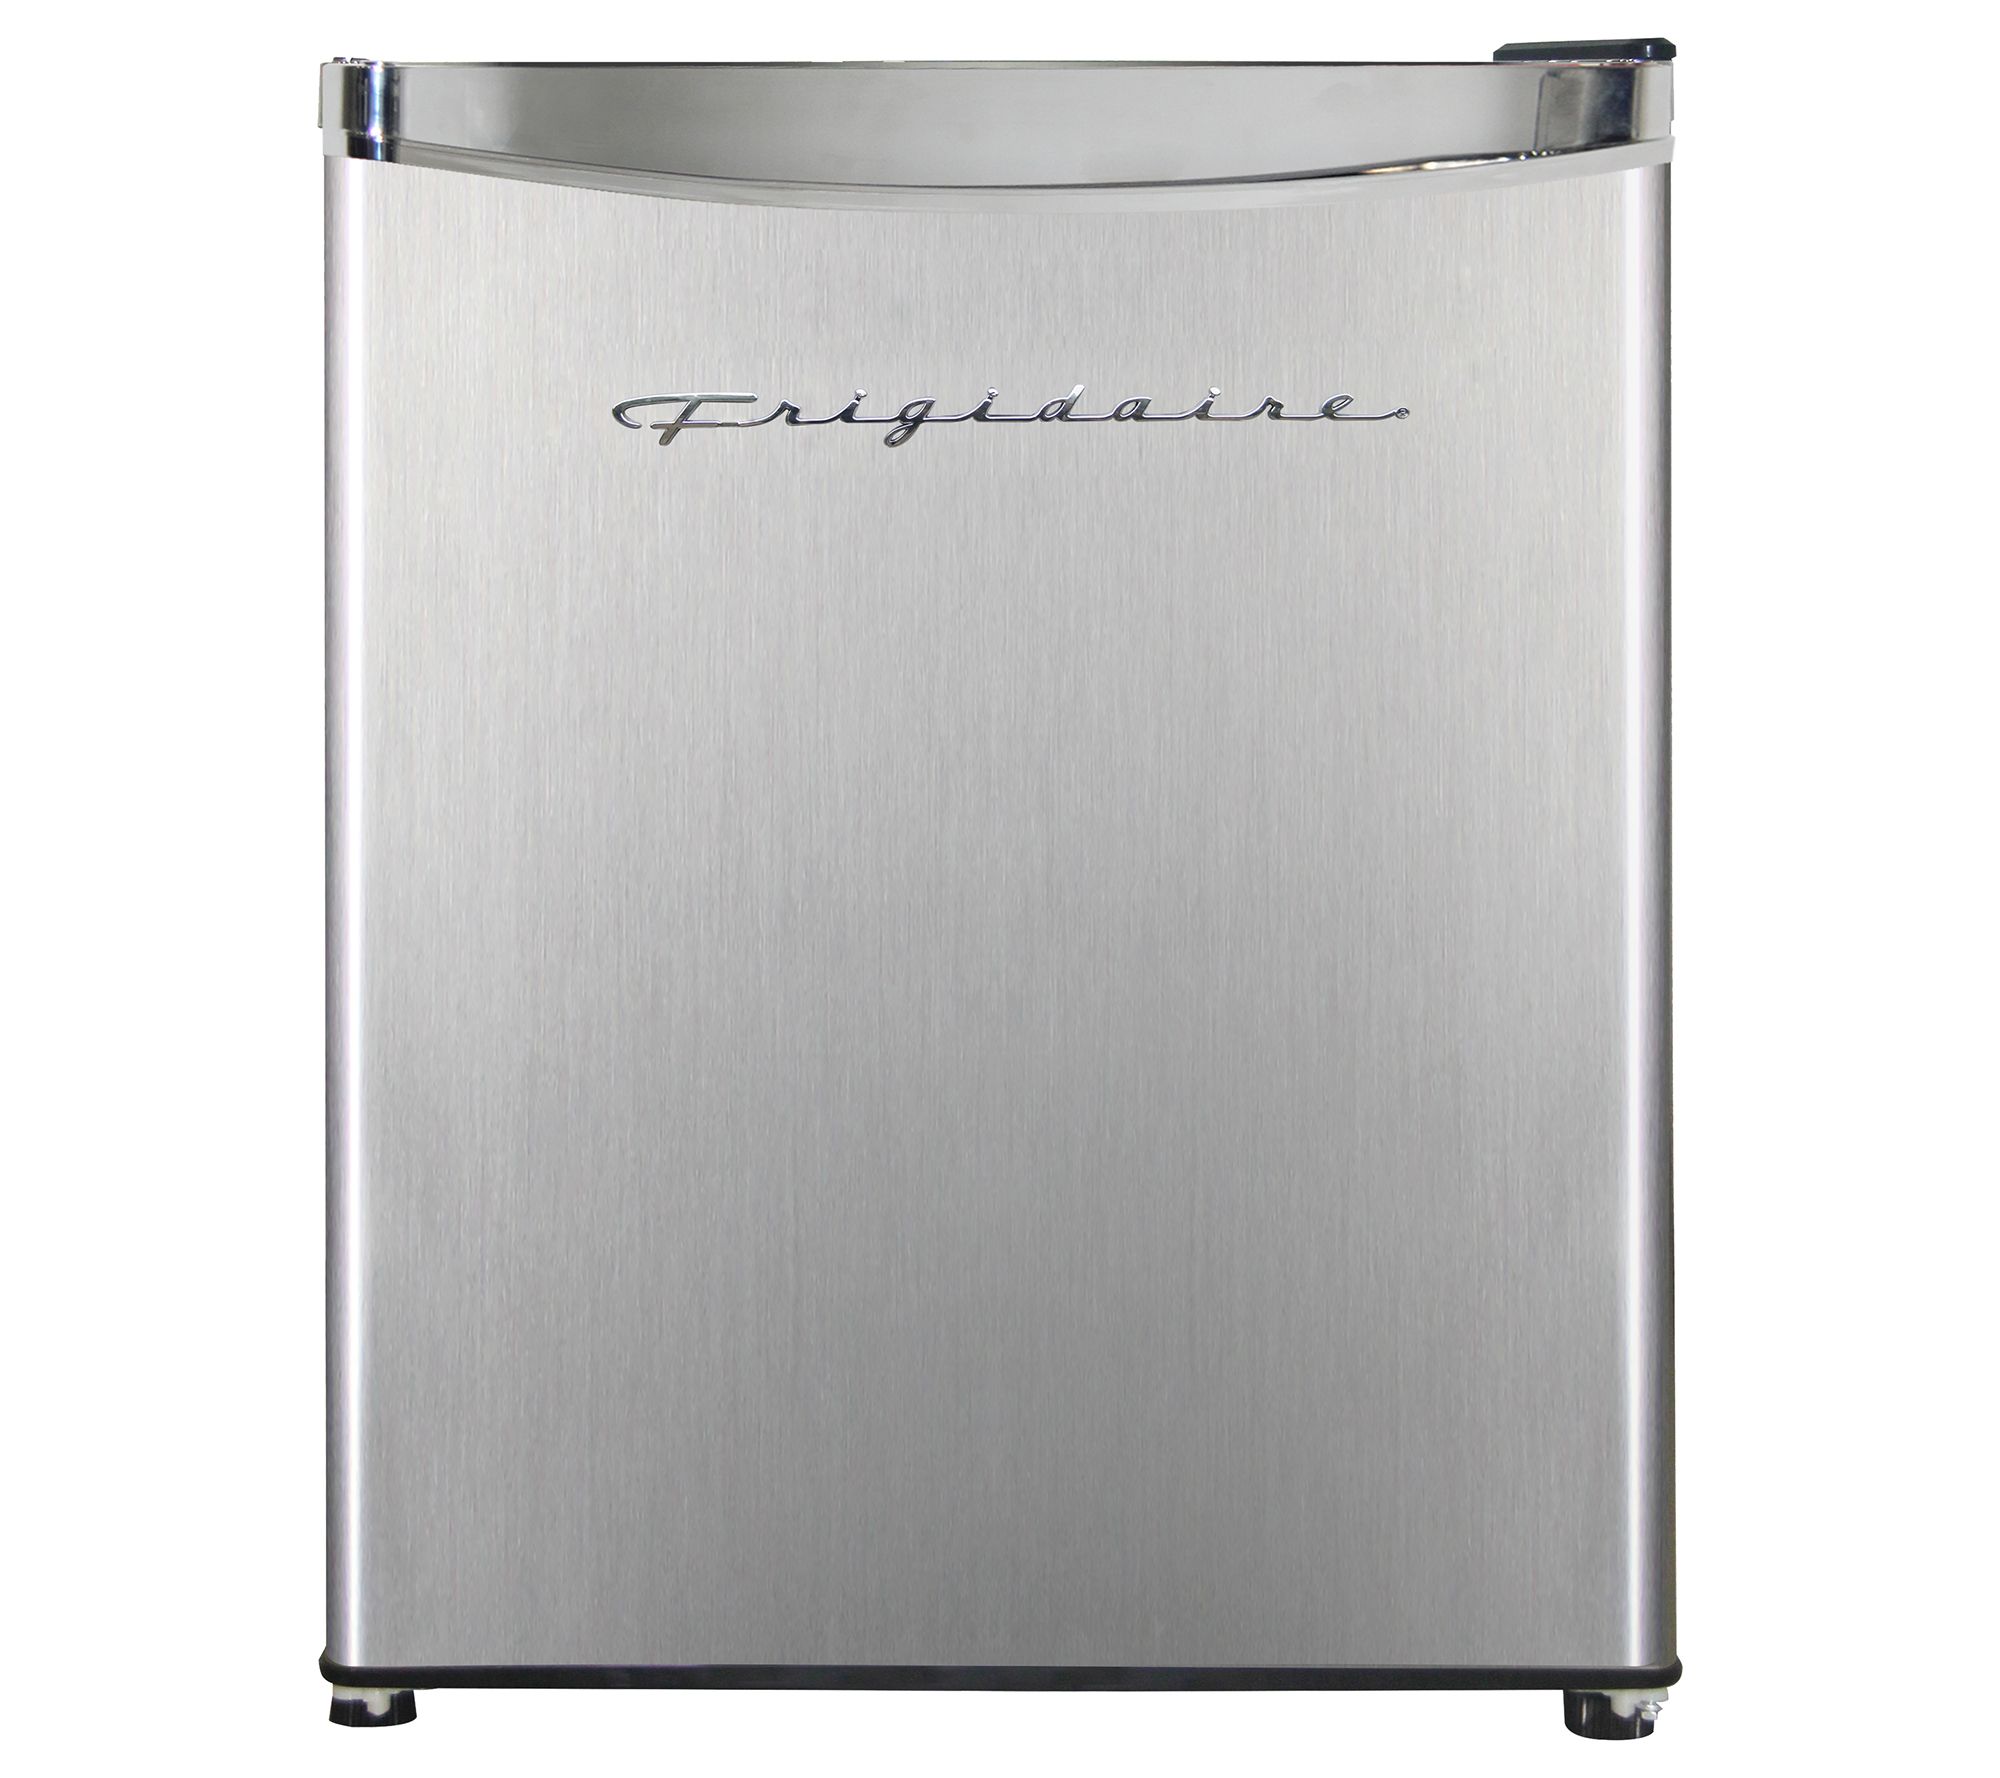 Frigidaire 1.6 cu-ft Retro Style Stainless Steel Compact